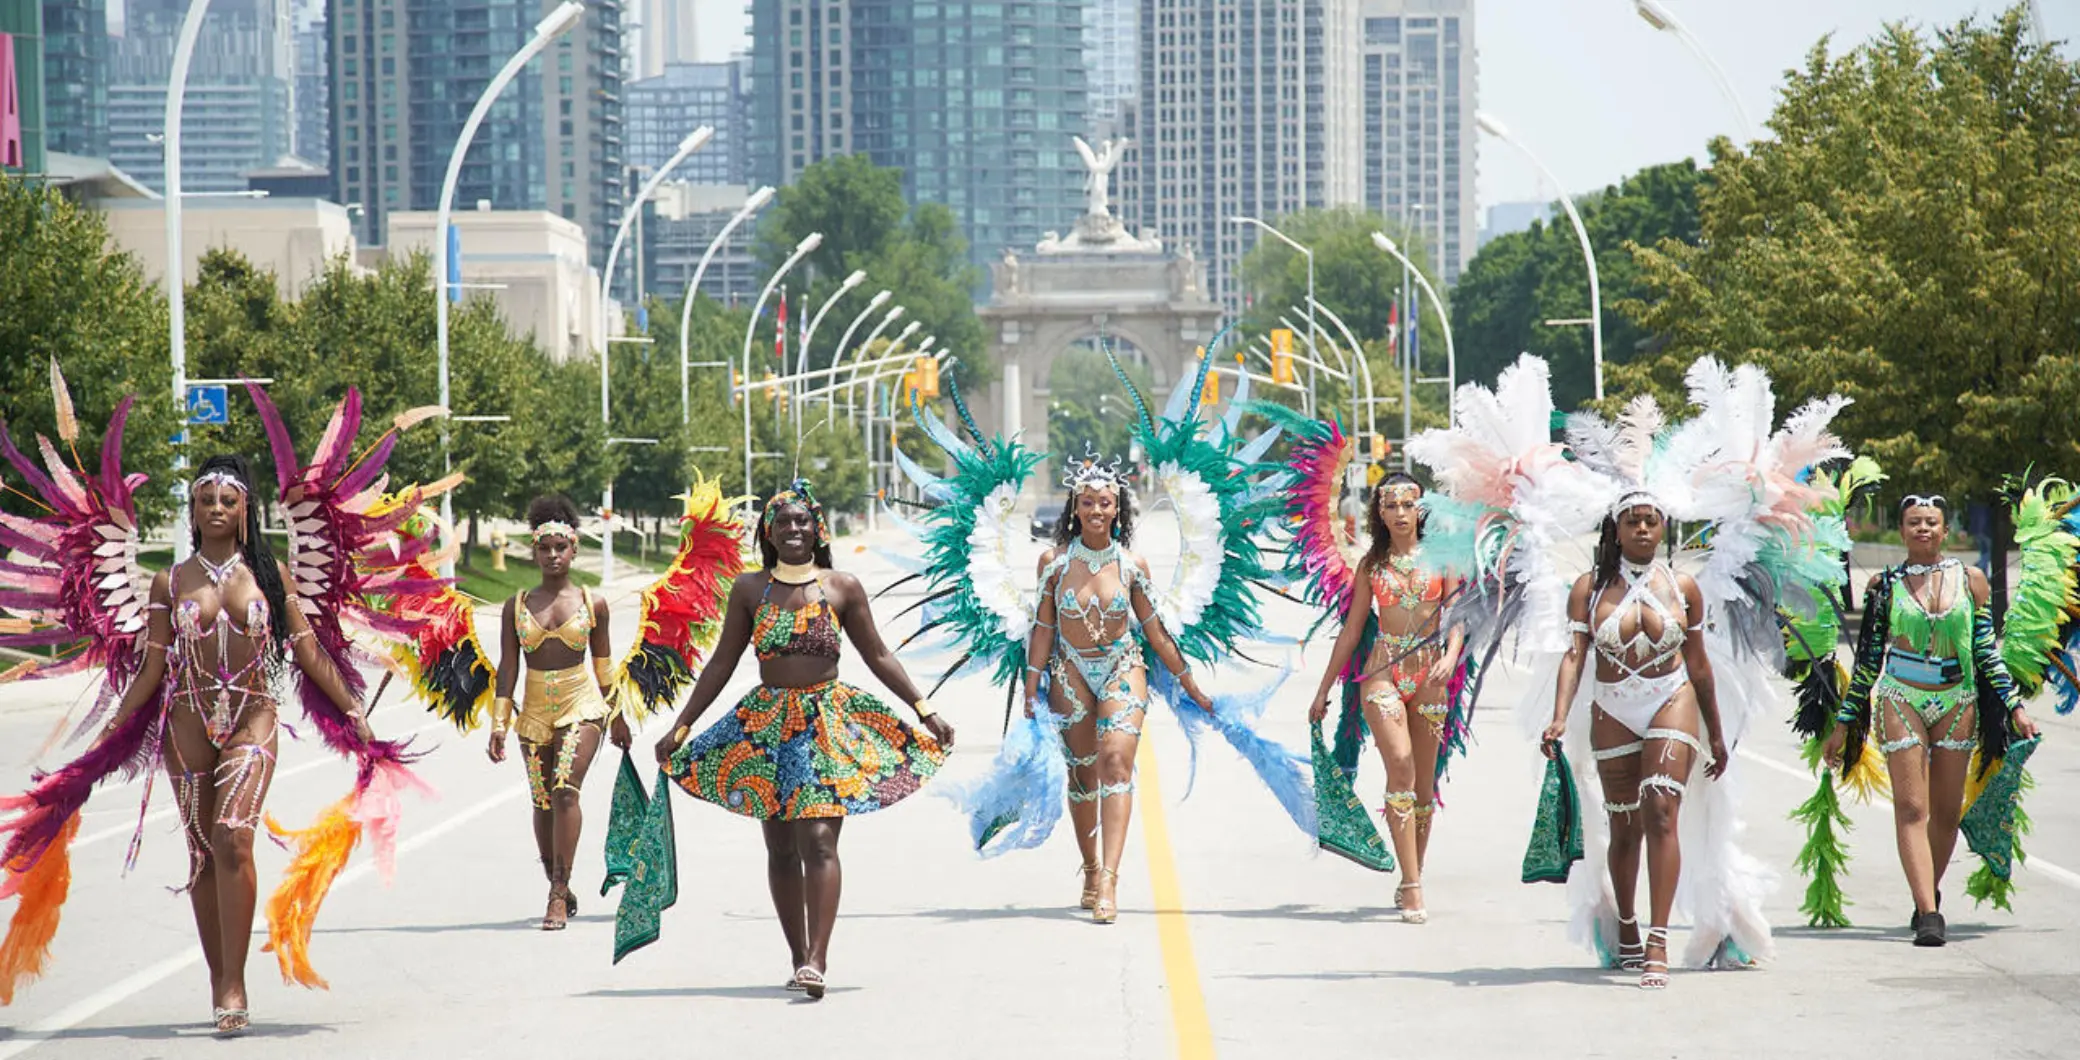 The Toronto Caribbean Carnival is about more than just the costumes